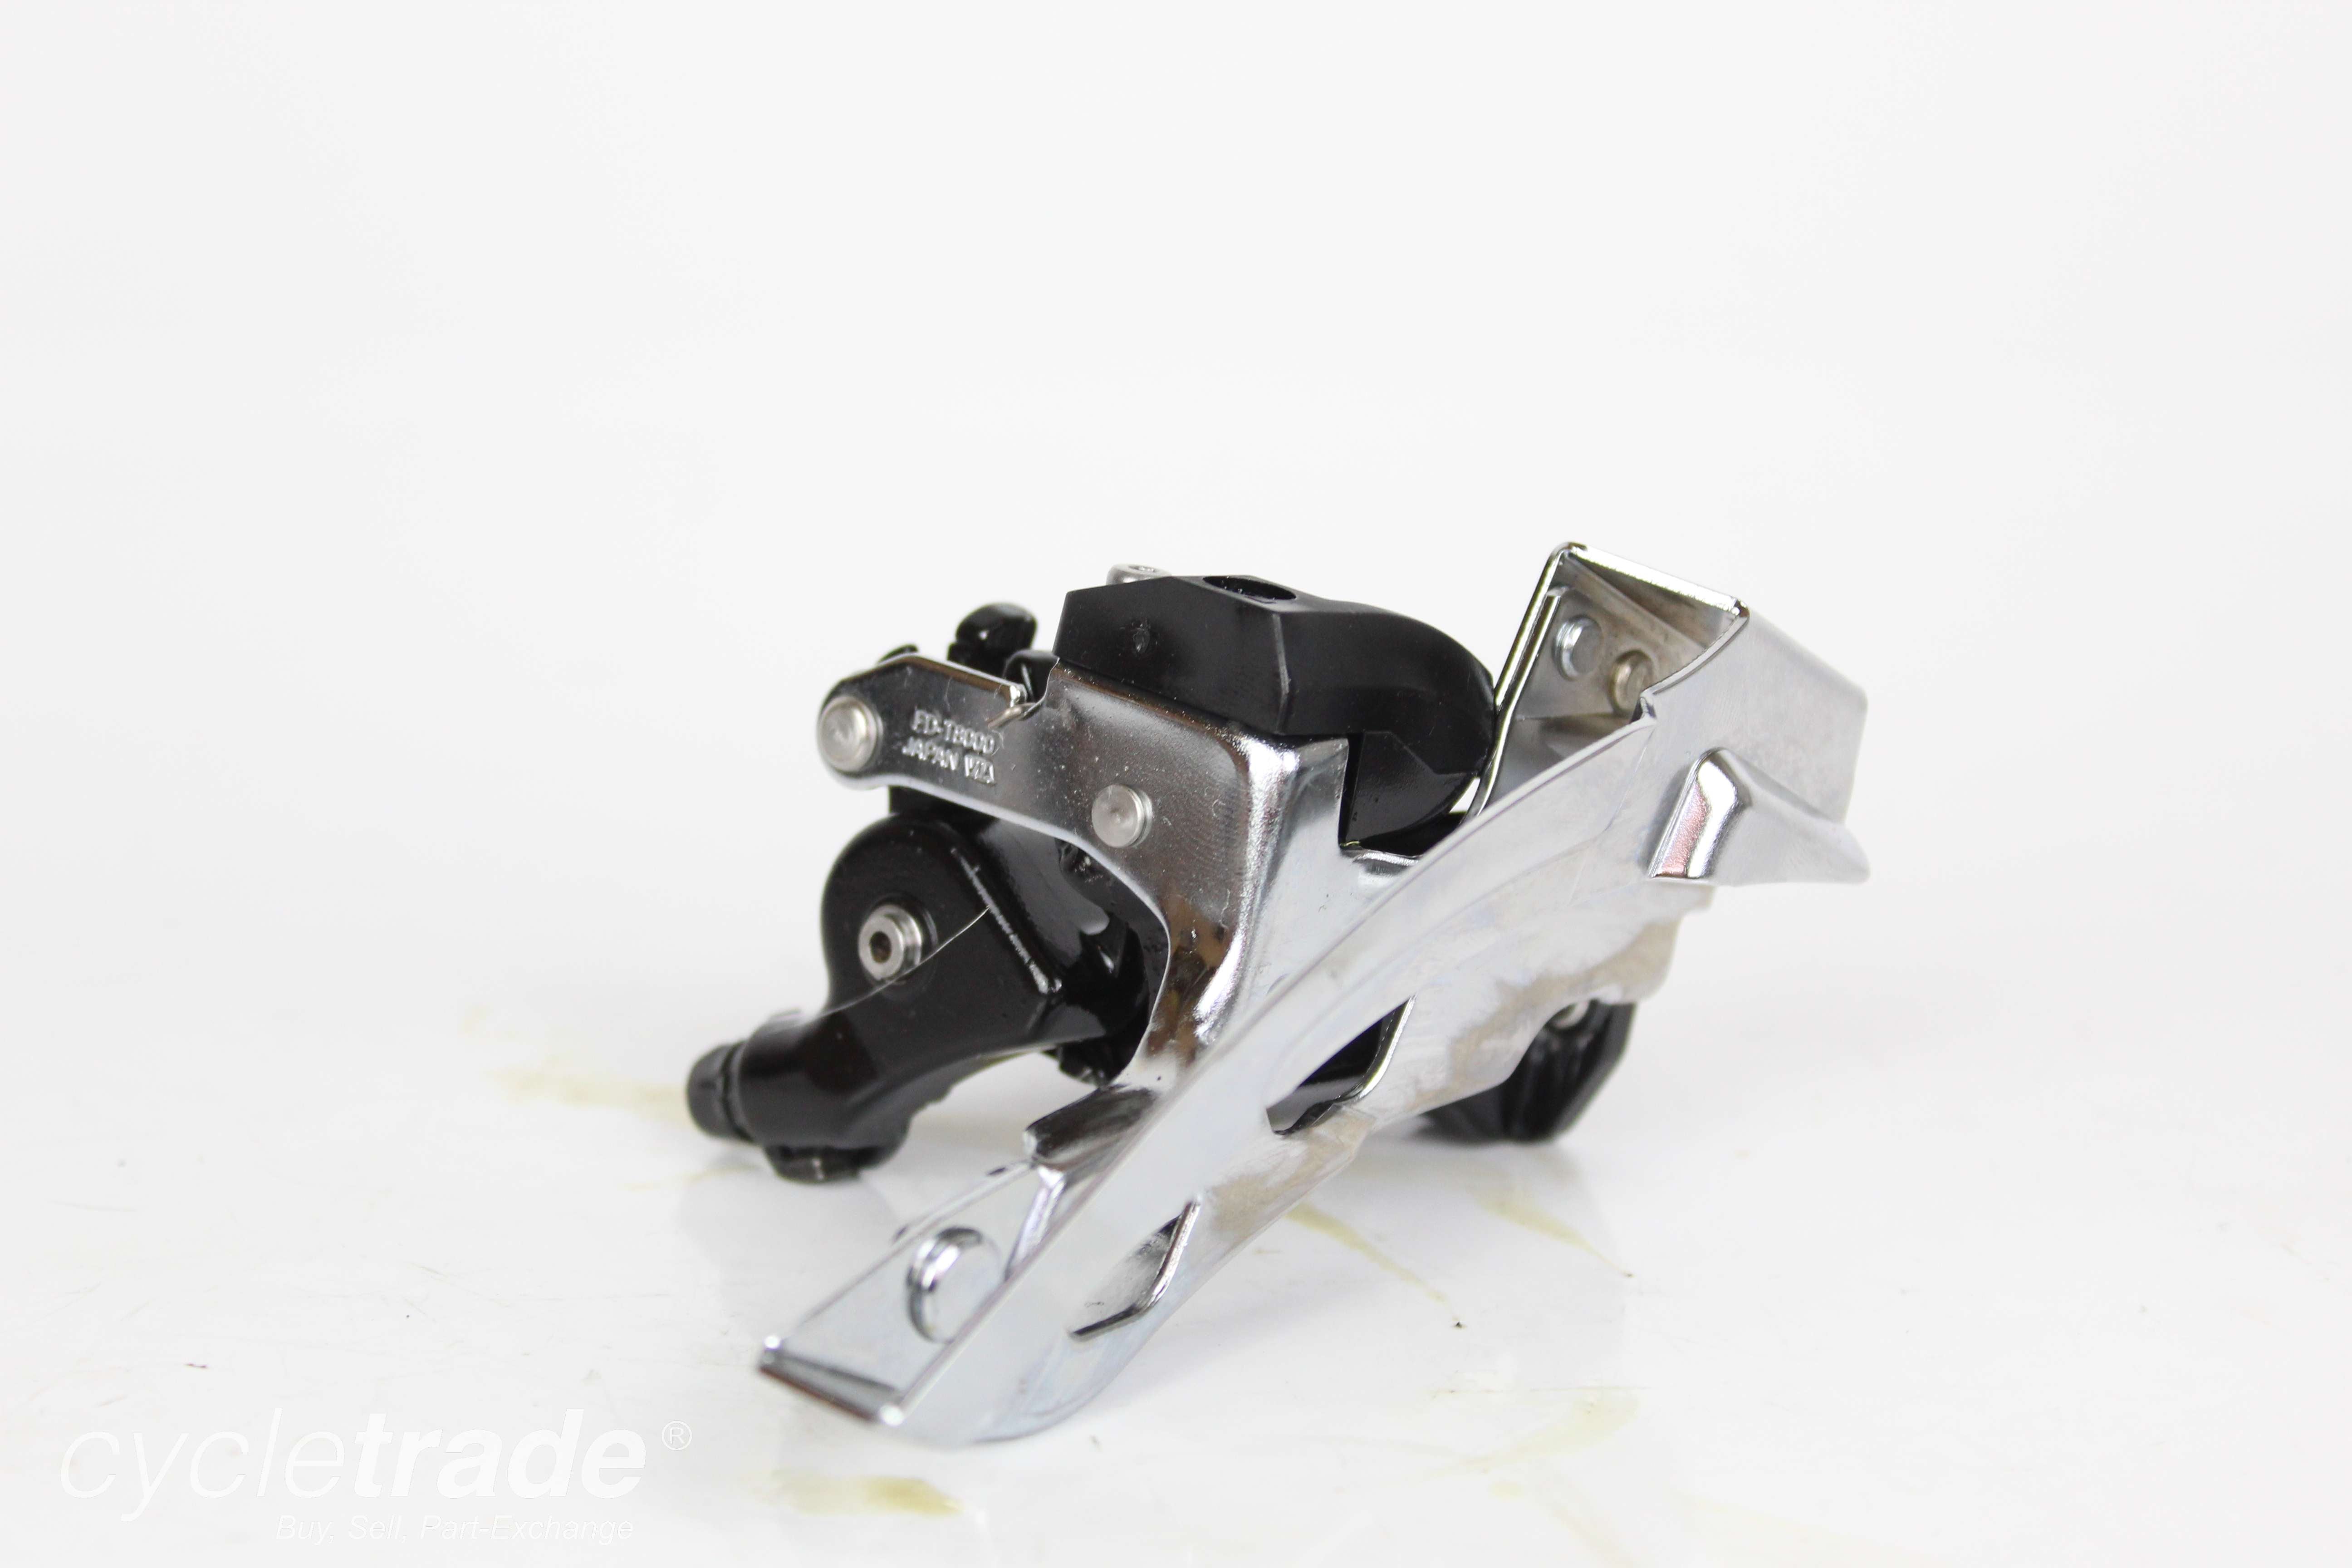 Front Derailleur- Shimano Deore XT FD-T8000 3x10 Speed 31.8mm Clamp on - Grade B+